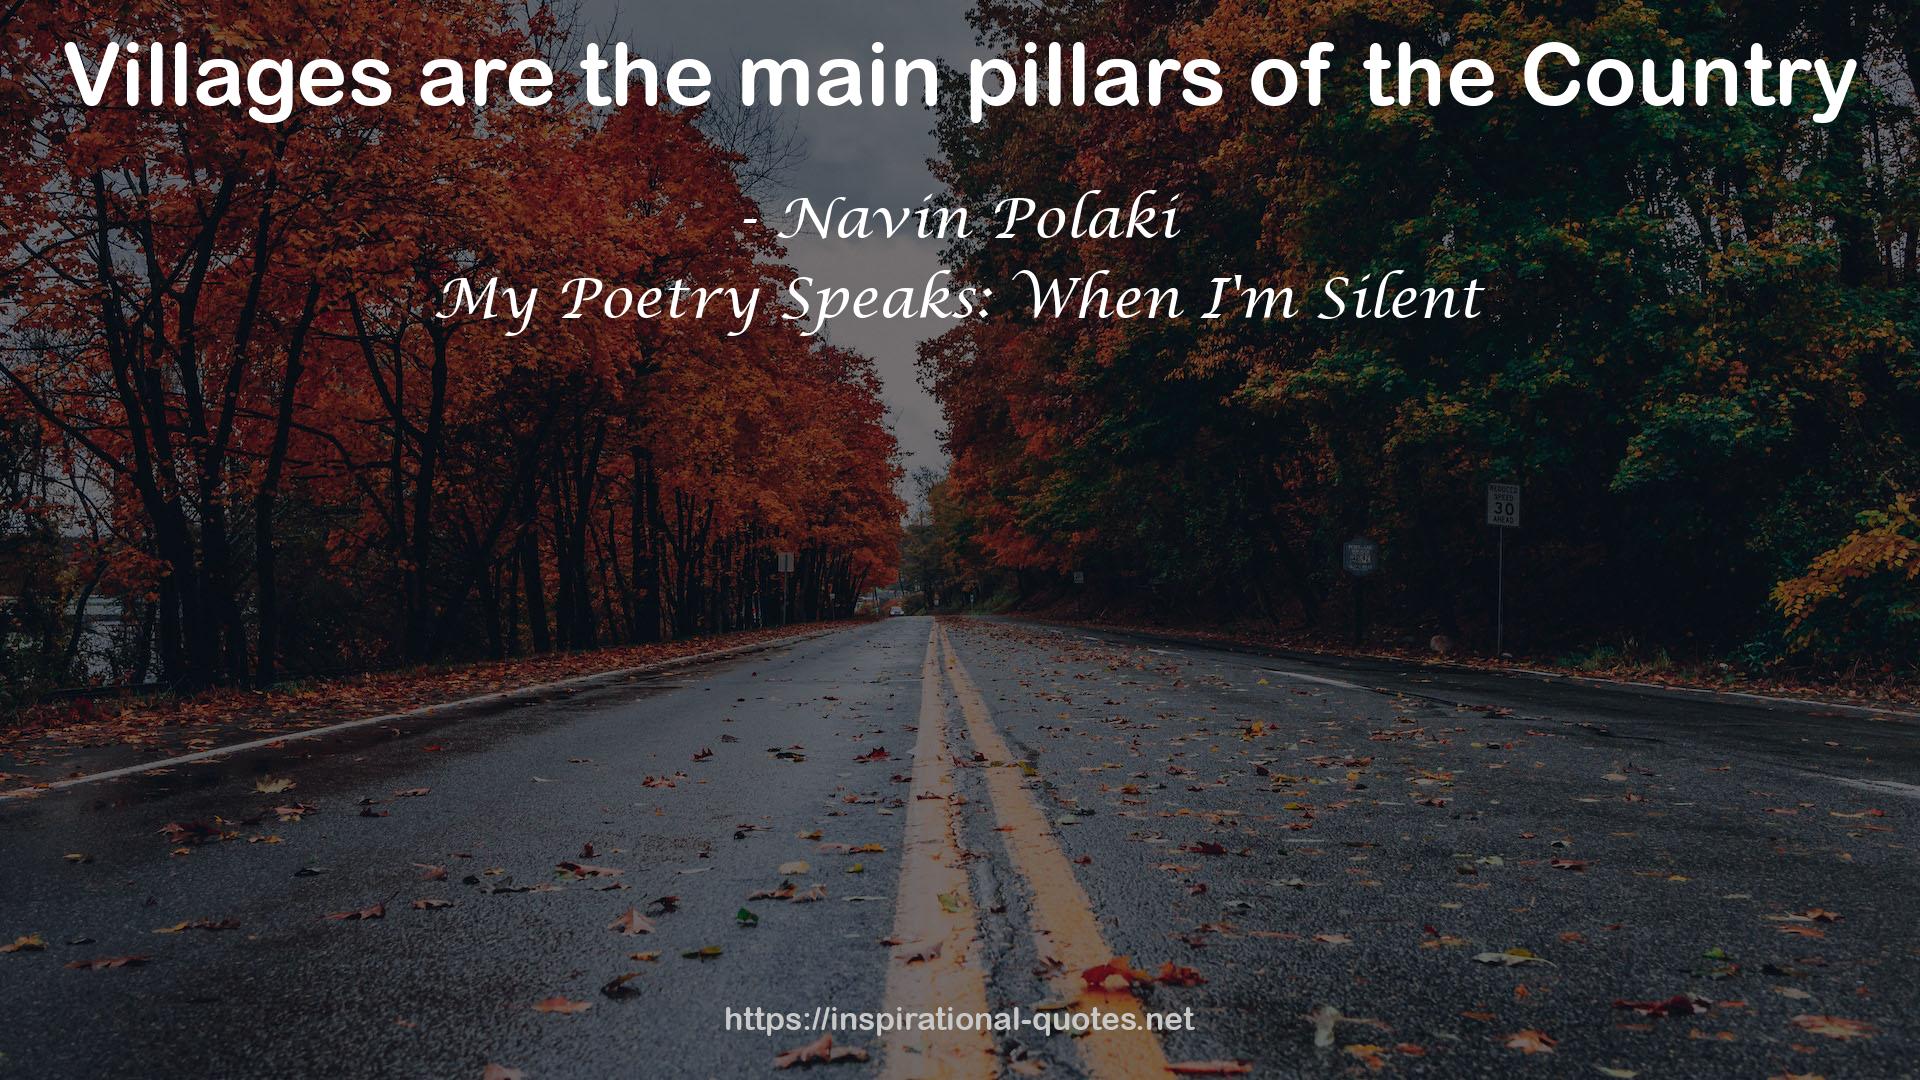 My Poetry Speaks: When I'm Silent QUOTES